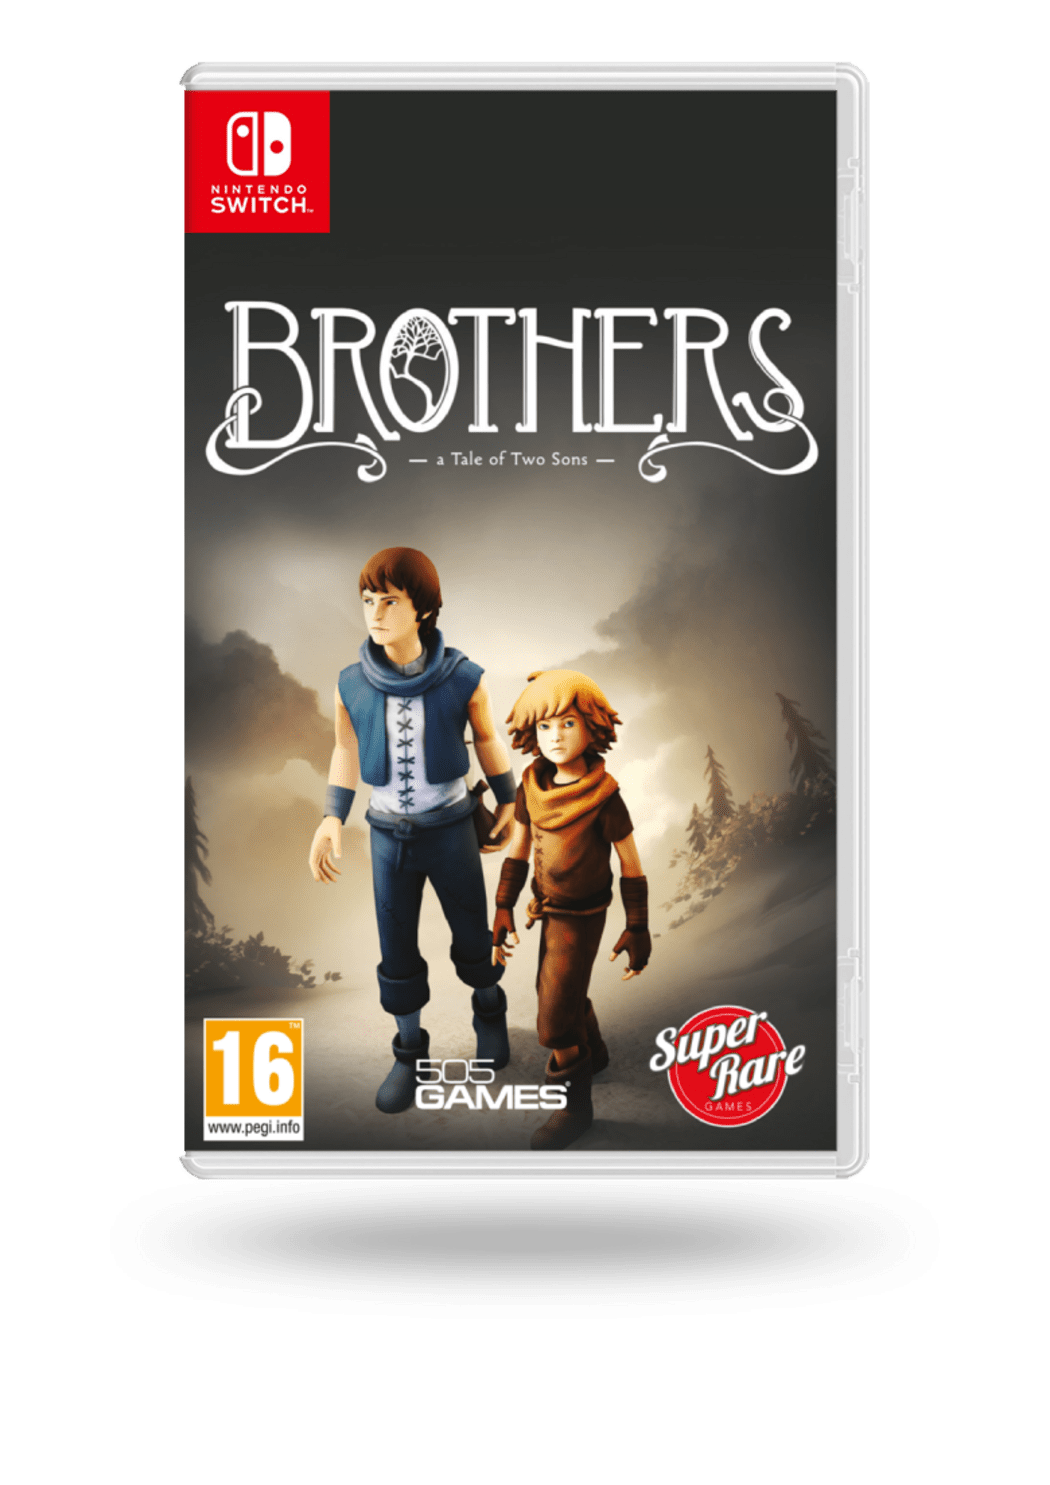 Brothers a Tale of two sons ps4. Brothers: a Tale of two sons обложка. Обложка игры brothers a Tale of two sons. Brothers: a Tale of two sons Remake обложка. A tale of two sons ps4